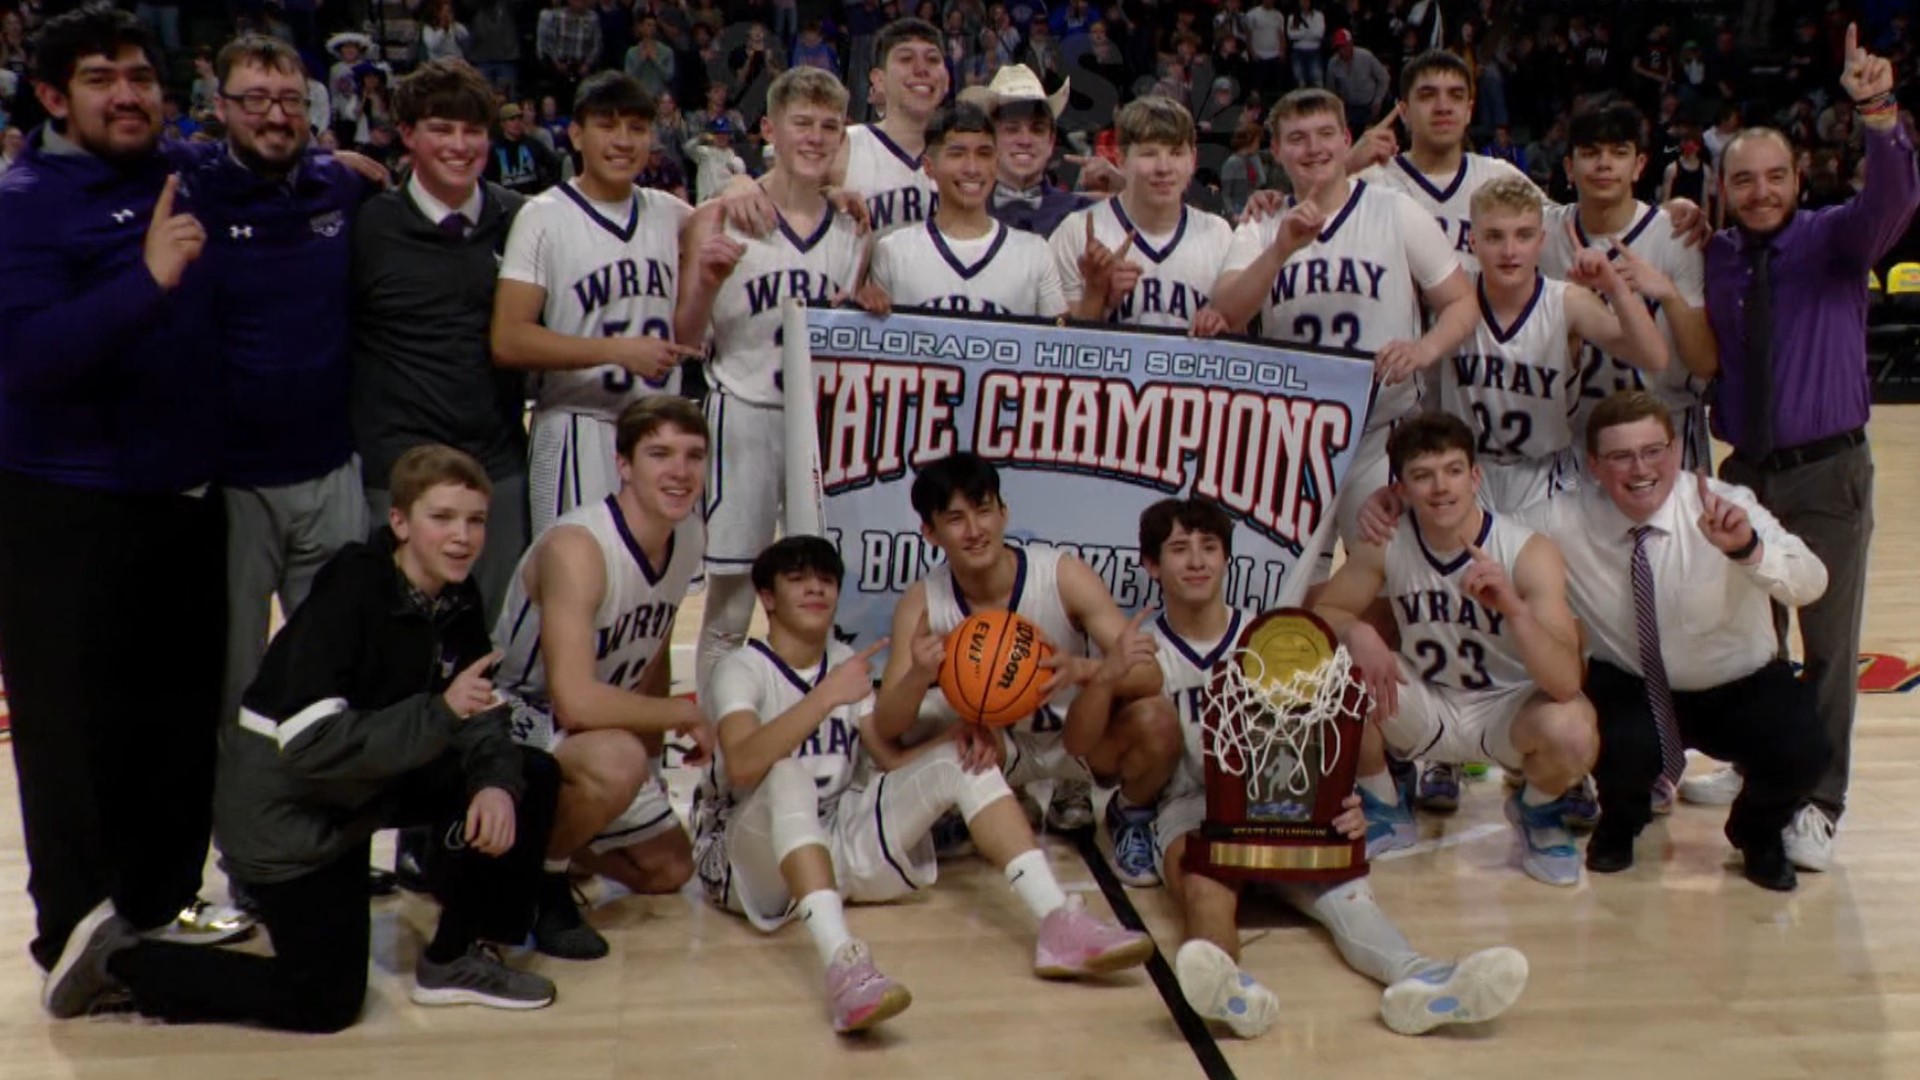 The Eagles defeated Sanford 45-41 in the Class 2A championship game for their second title in three years.